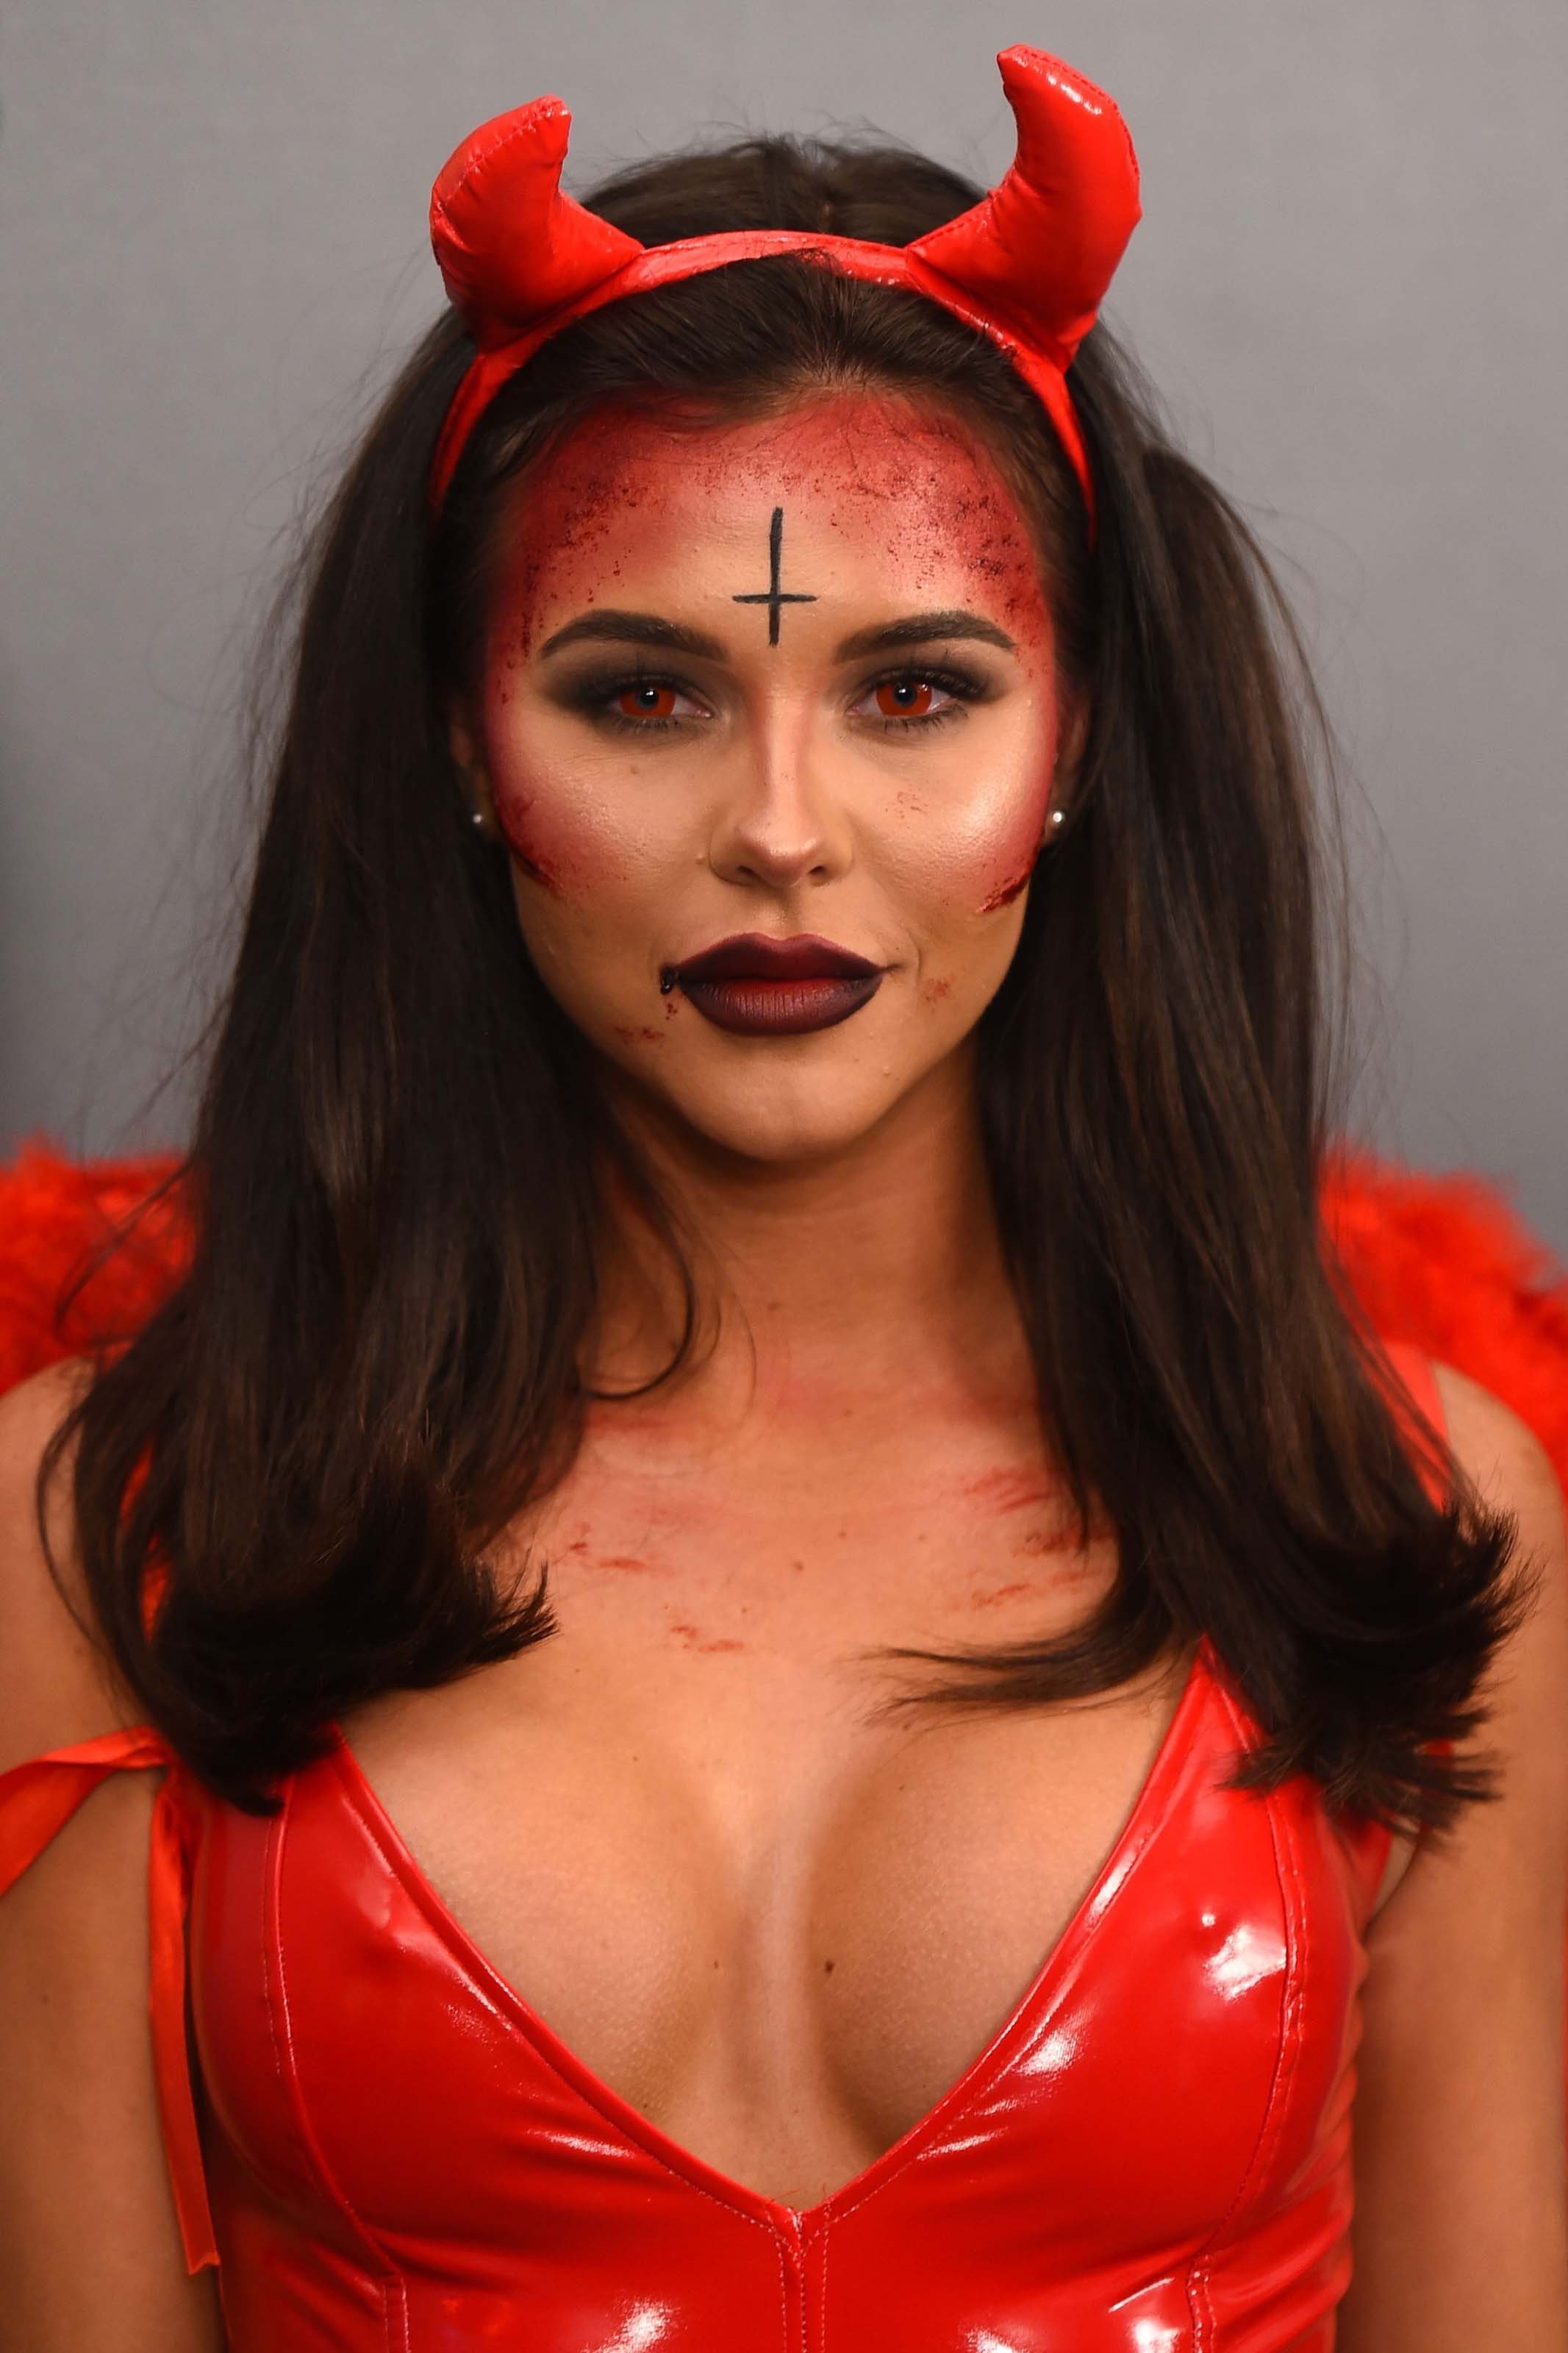 Shelby Tribble attends KISS Haunted House Party